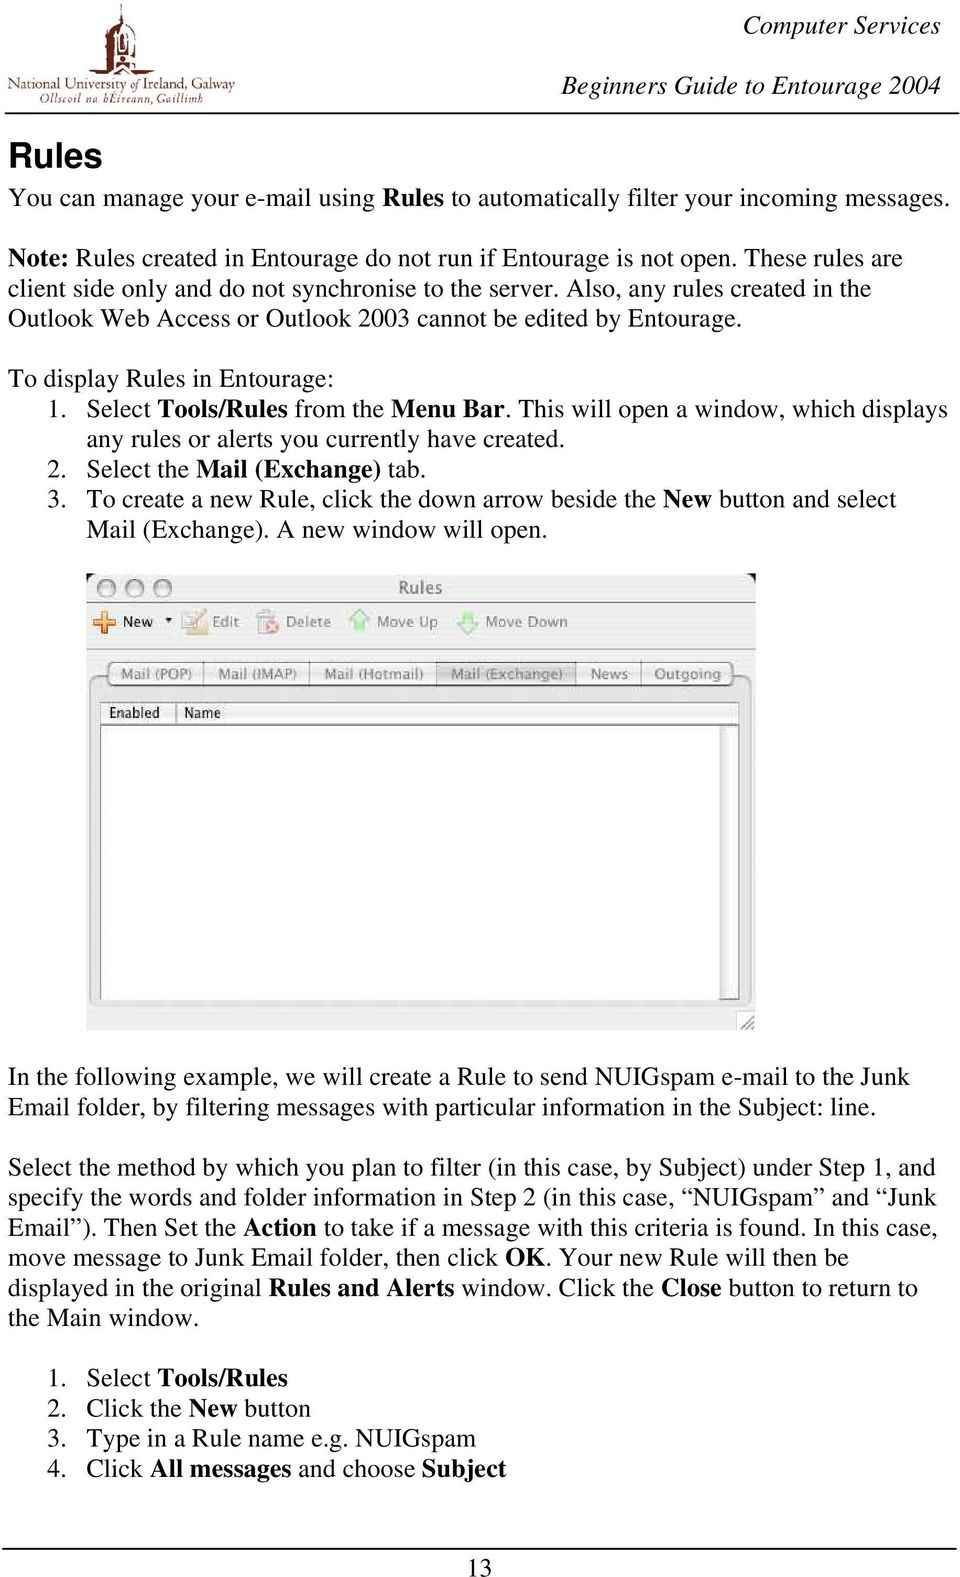 To display Rules in Entourage: 1. Select Tools/Rules from the Menu Bar. This will open a window, which displays any rules or alerts you currently have created. 2. Select the Mail (Exchange) tab. 3.